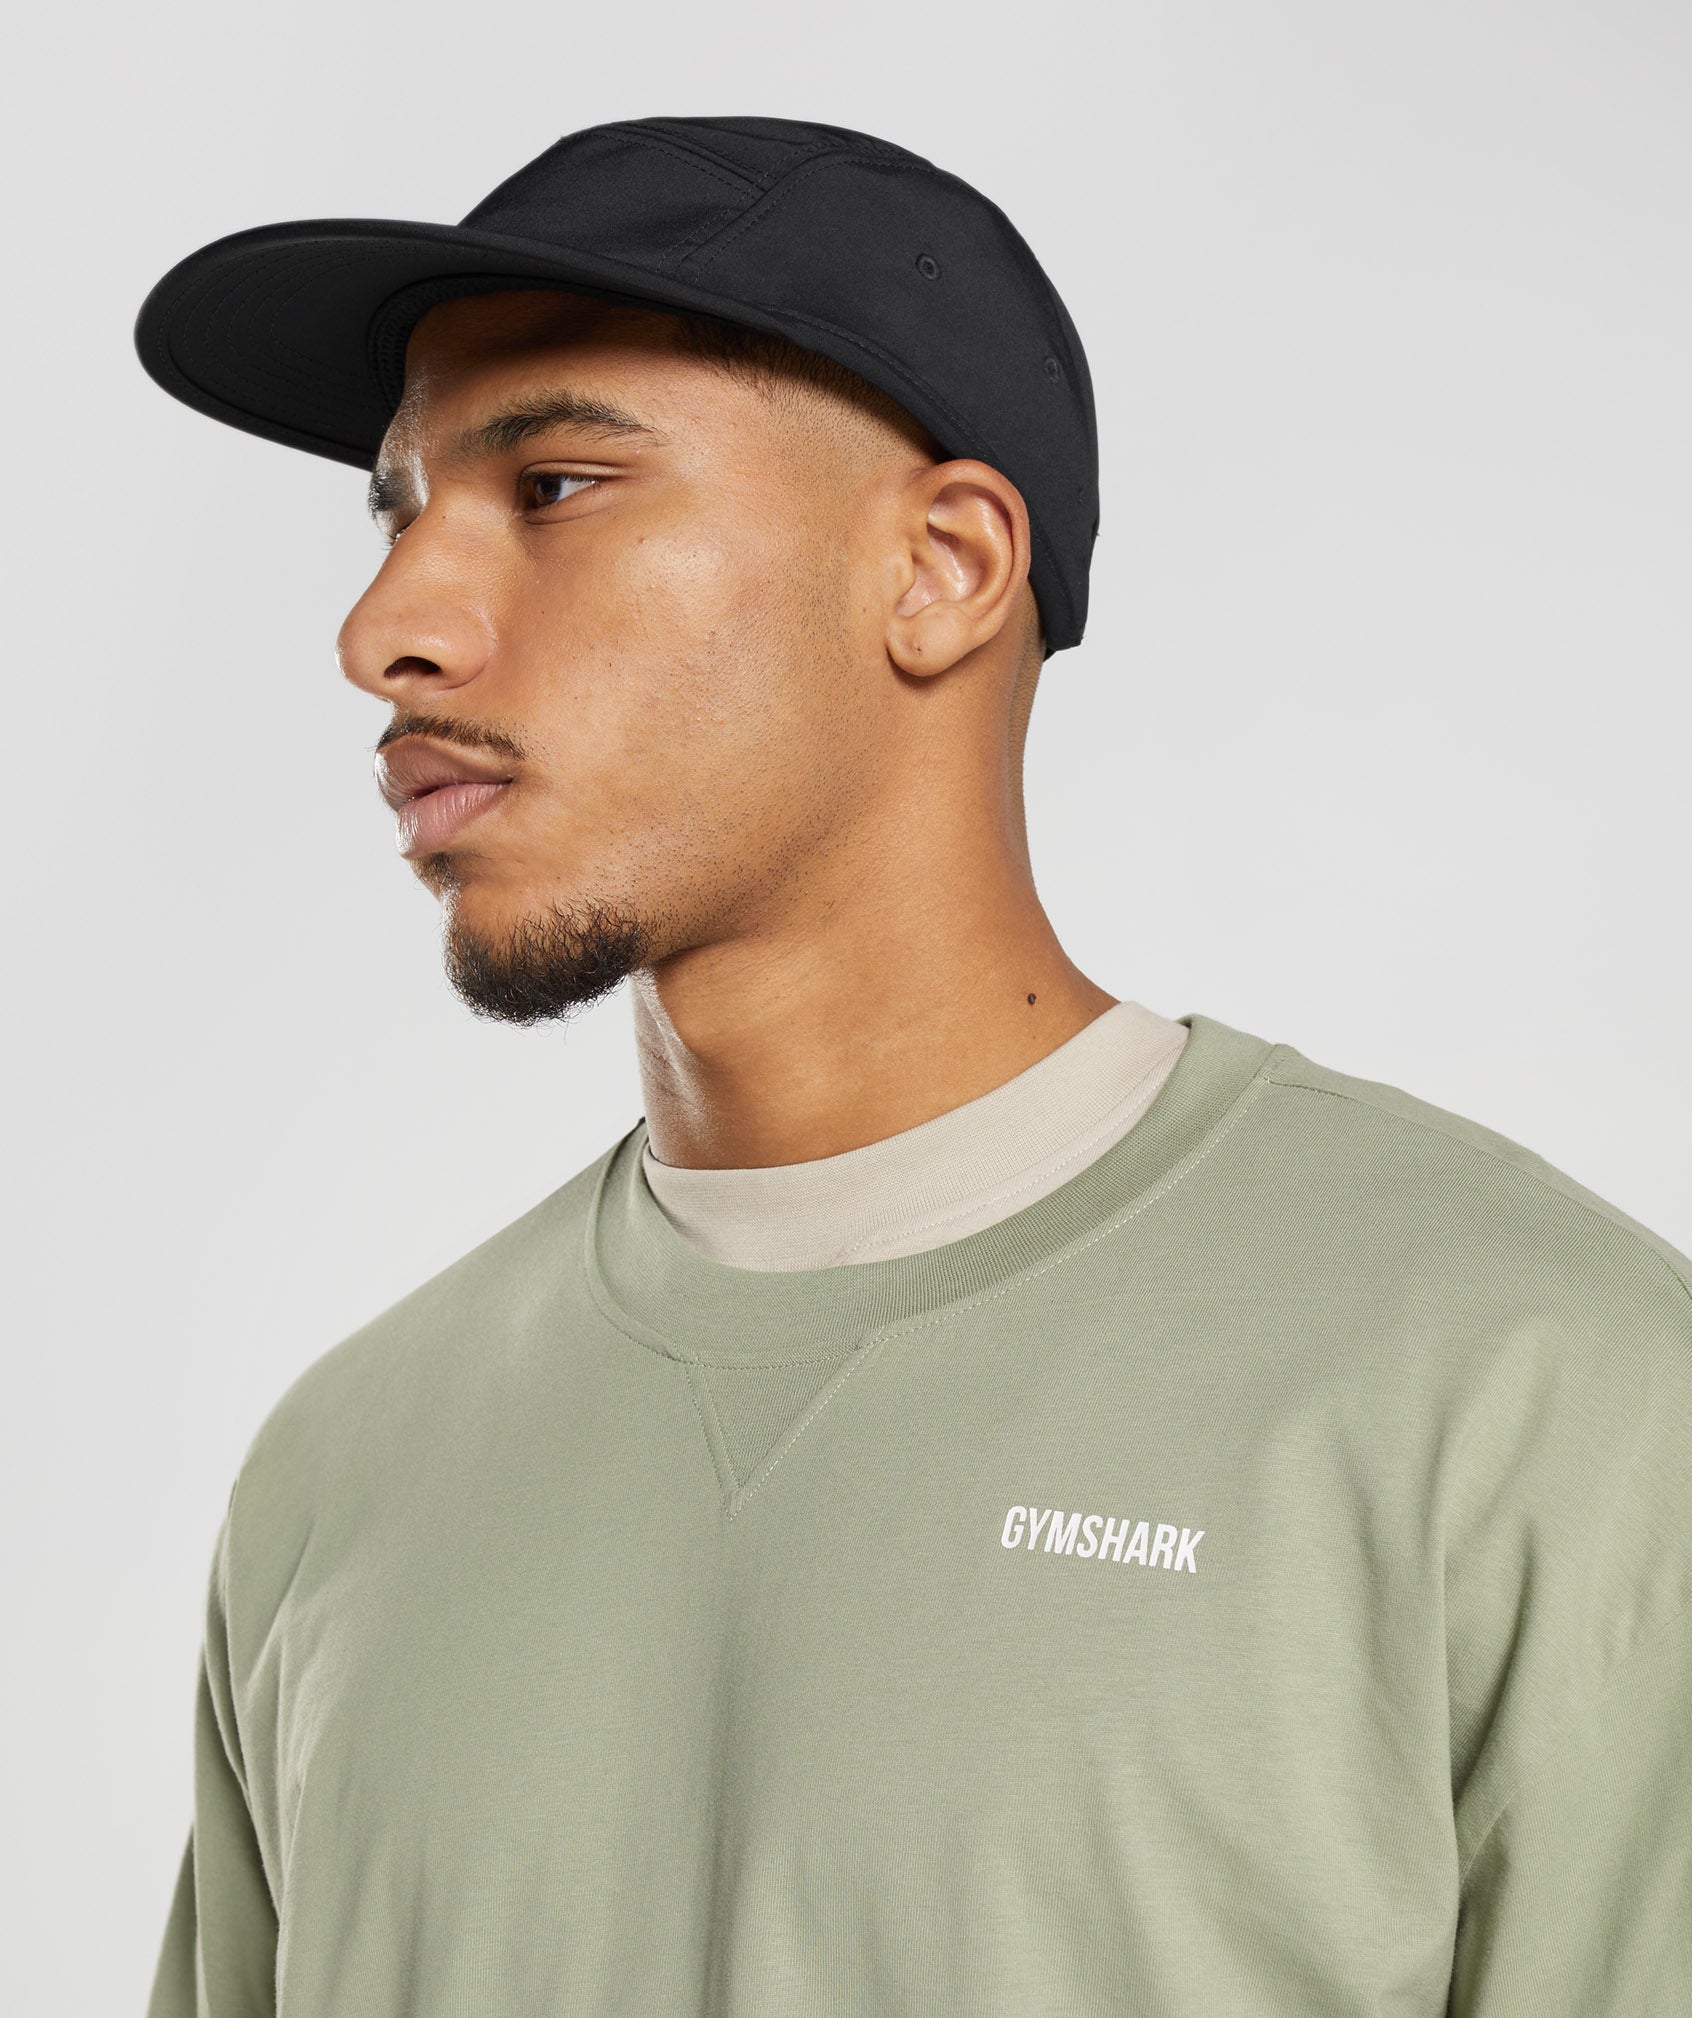 Rest Day Sweats Long Sleeve T-Shirt in Sage Green - view 6